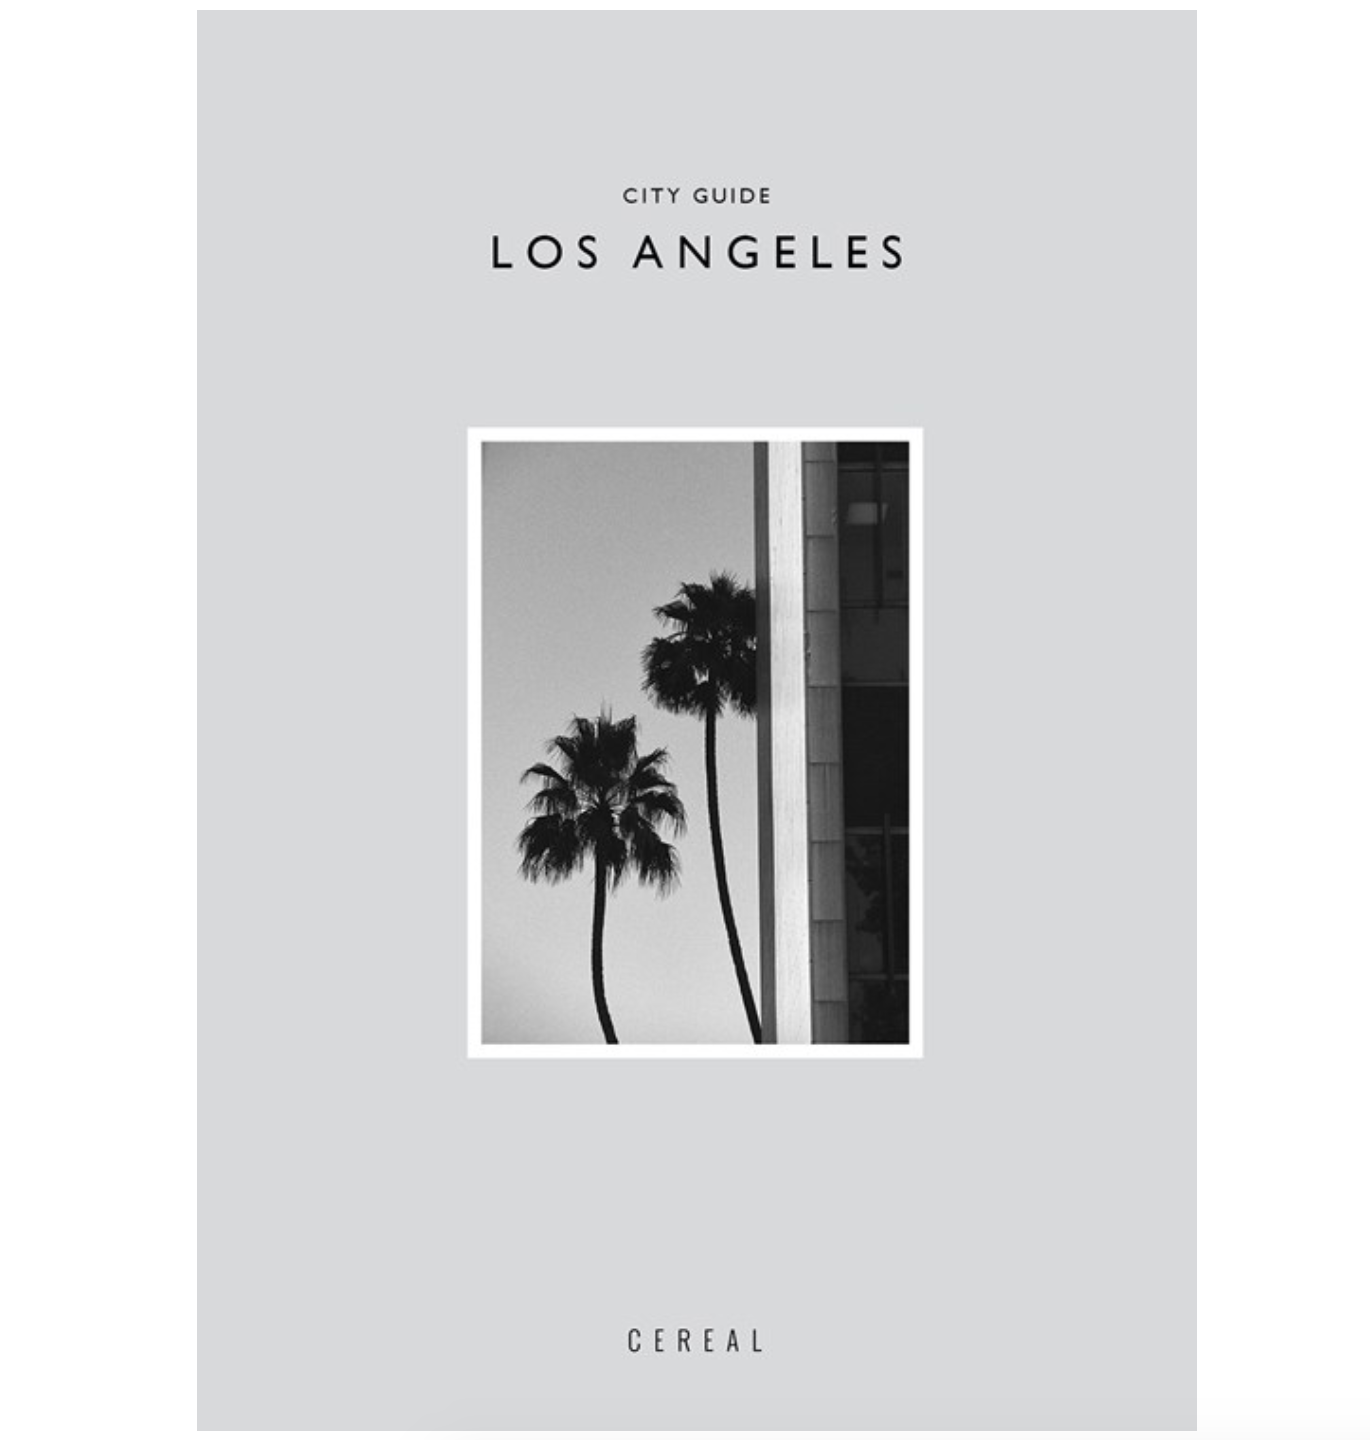 City Guide: Los Angeles by Cereal